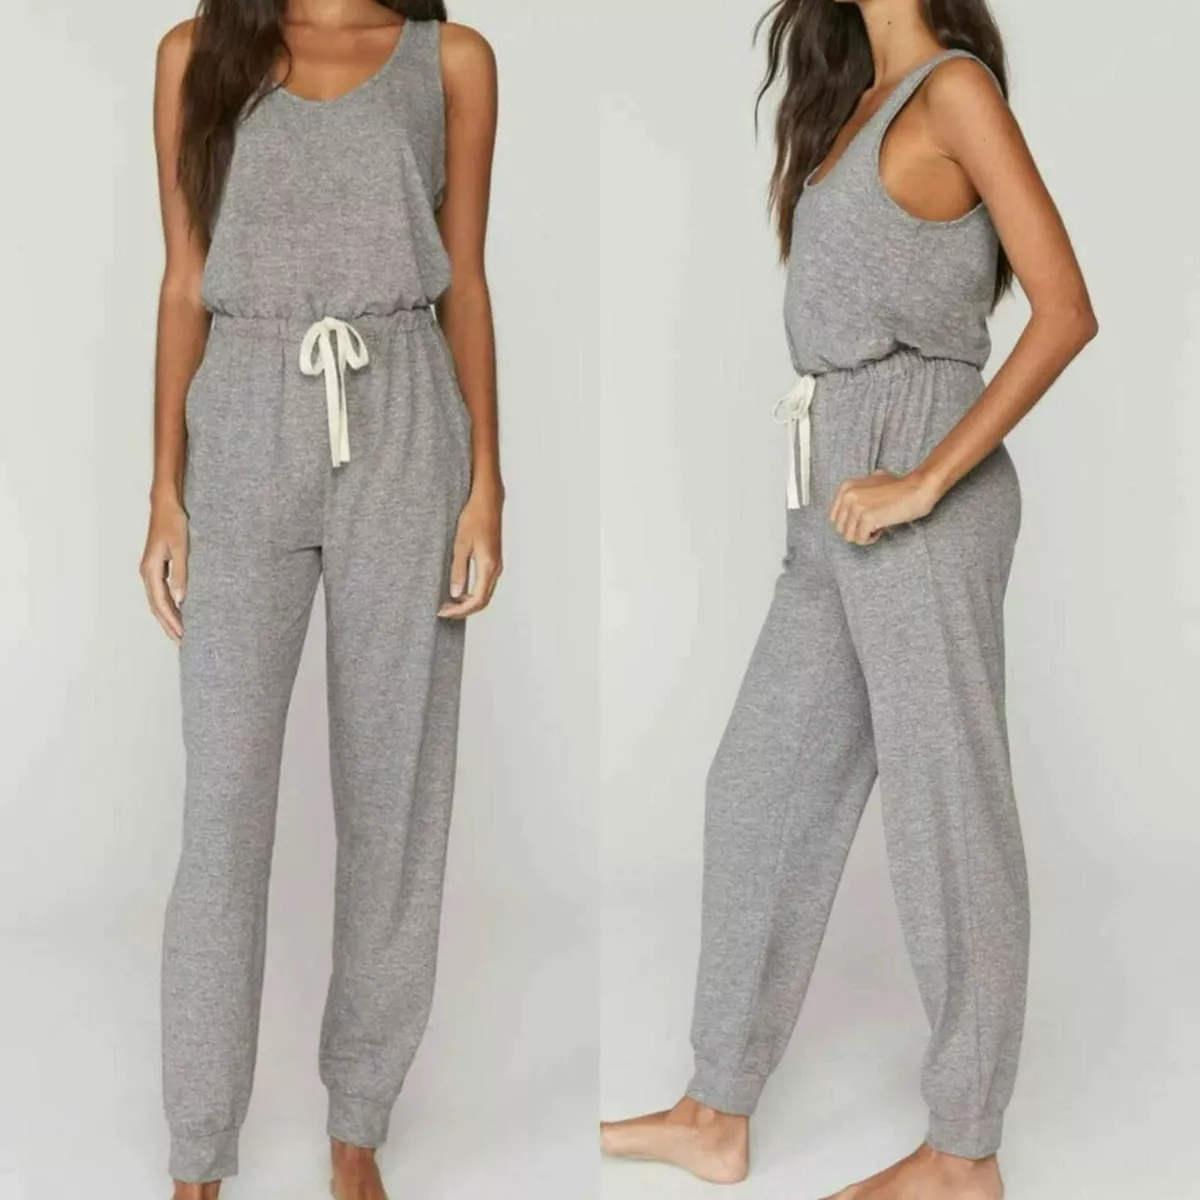 HERE&NOW Women's Solid Jump Suit Dress Sleeveless Casual Strappy Summer  Wear Slip On Attched Top And Bottom Set - Walmart.com